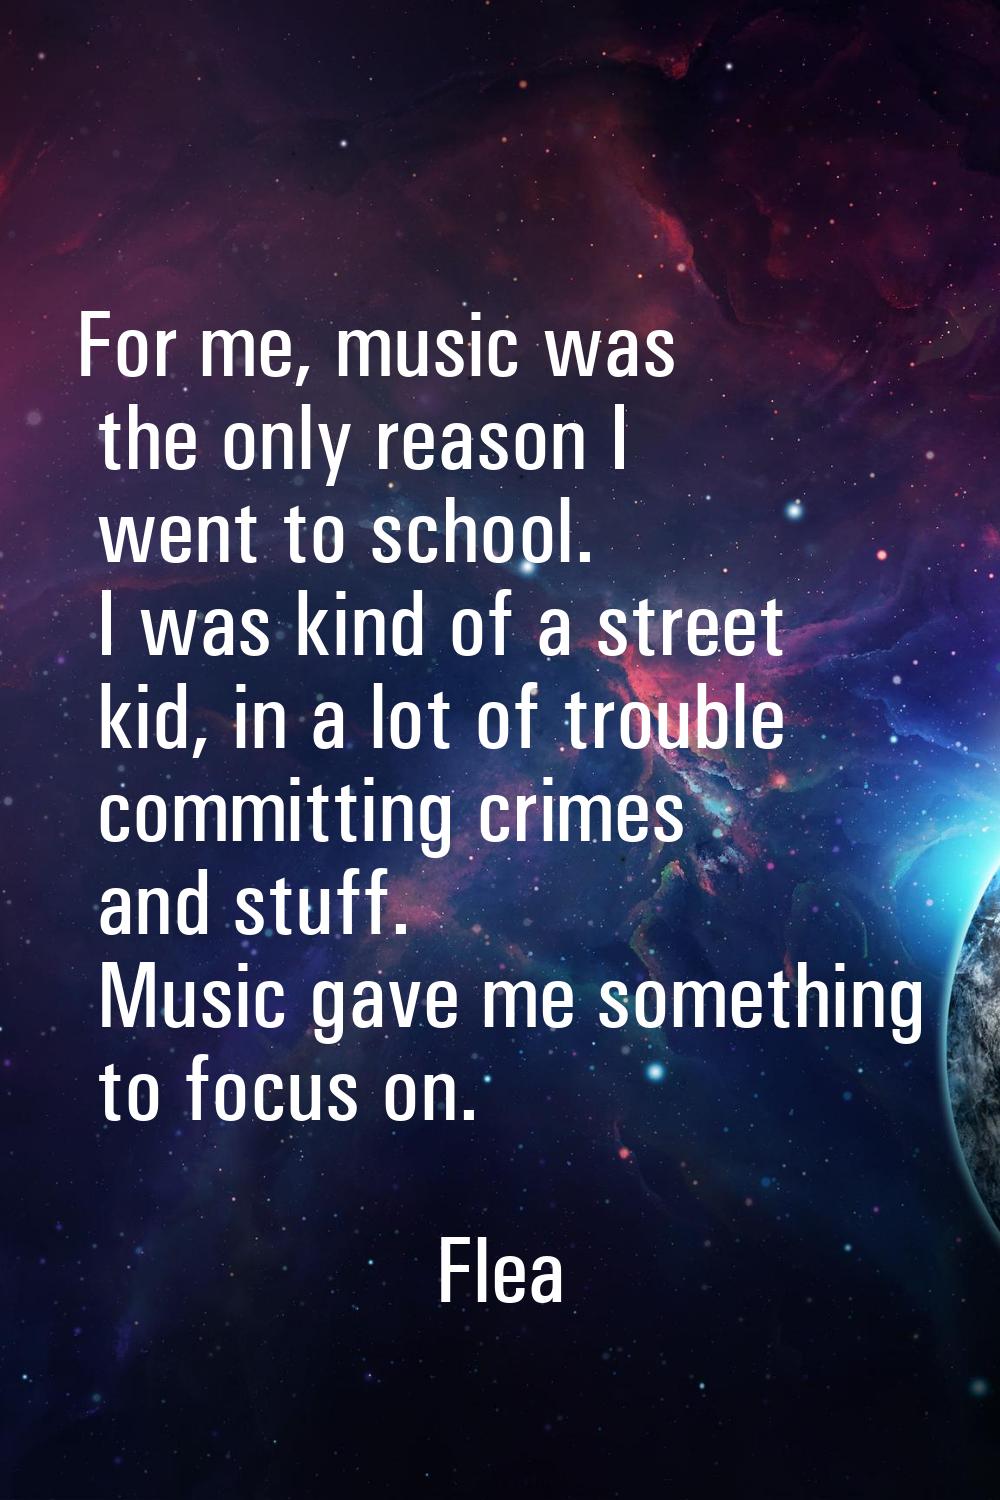 For me, music was the only reason I went to school. I was kind of a street kid, in a lot of trouble